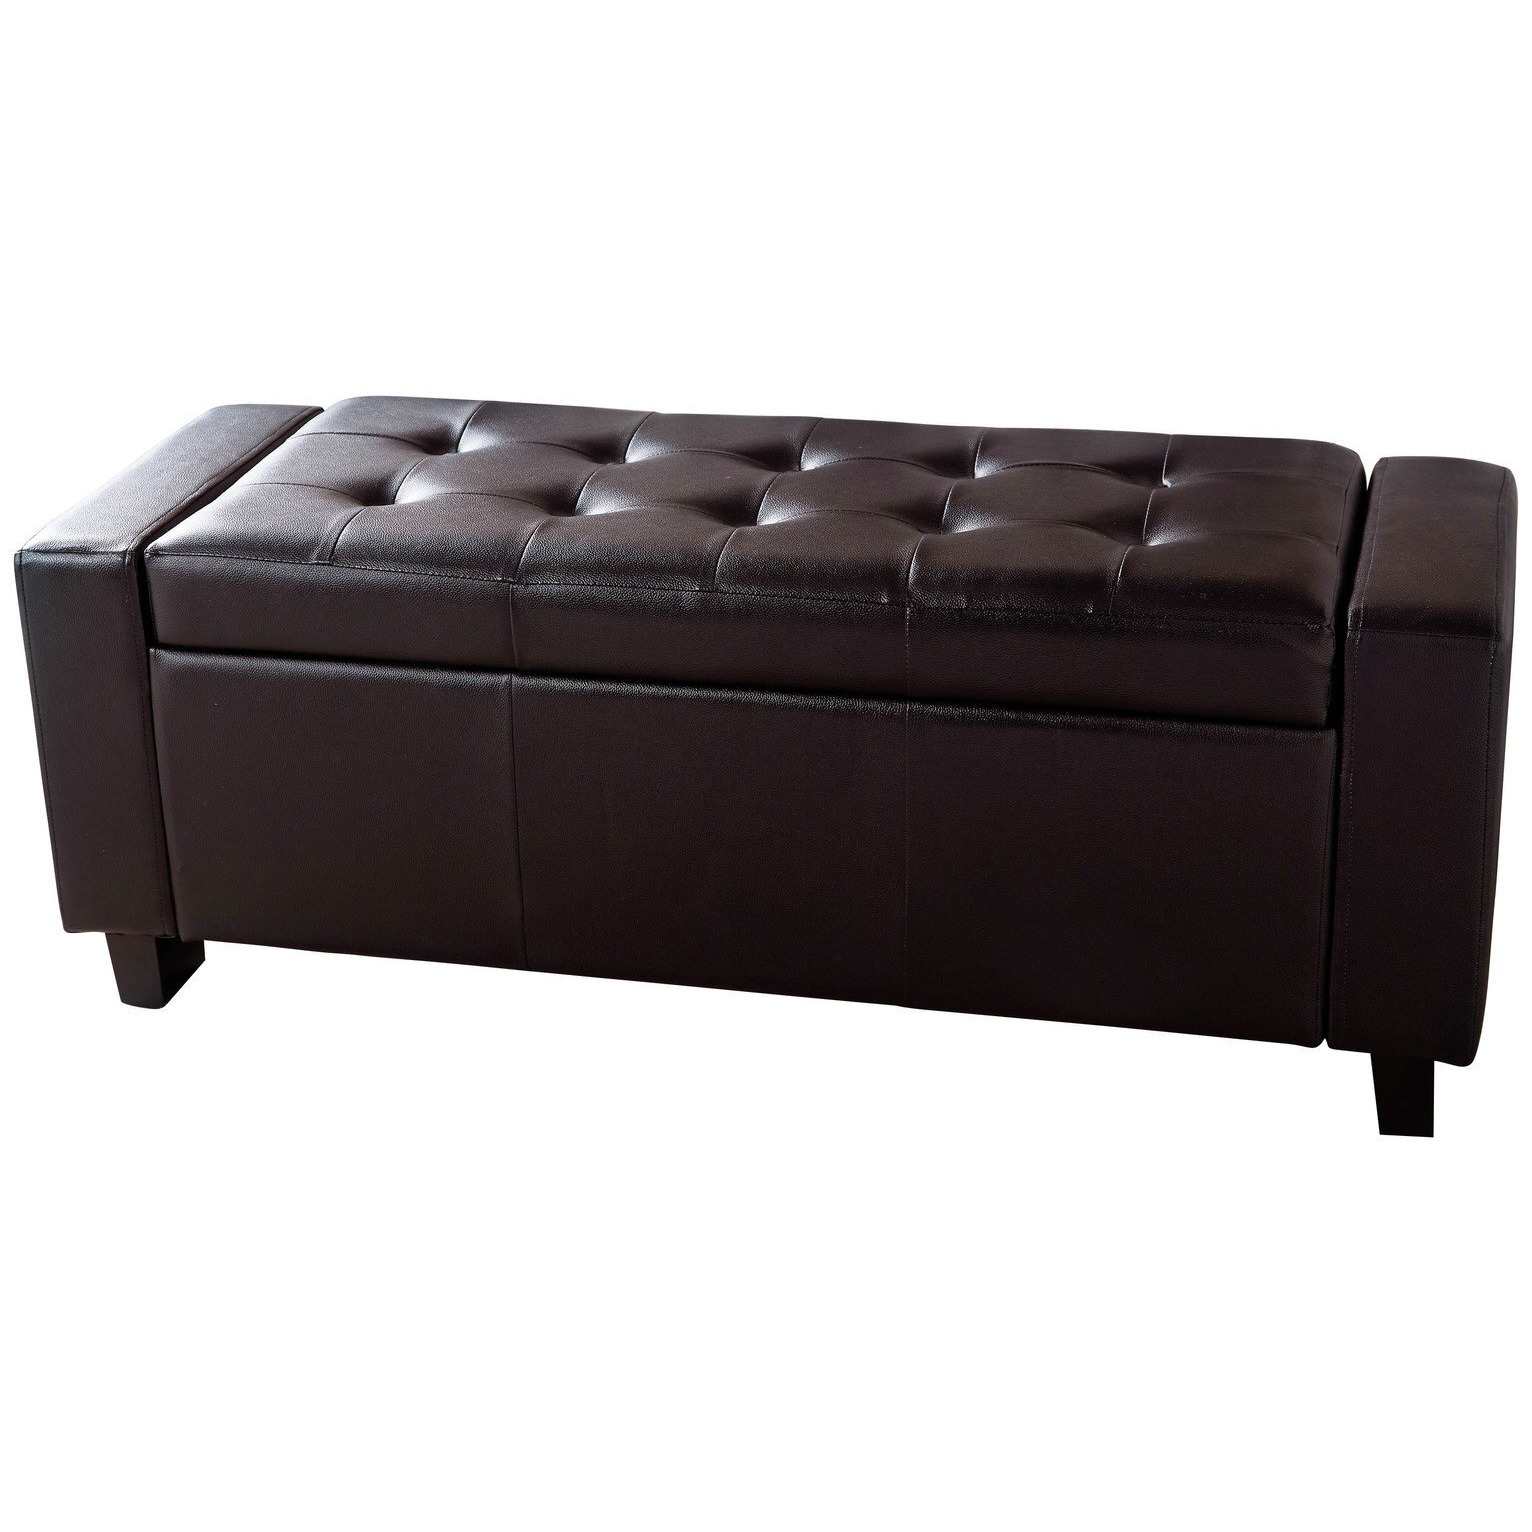 GFW Verona Faux Leather Ottoman Bench - Brown - image 1